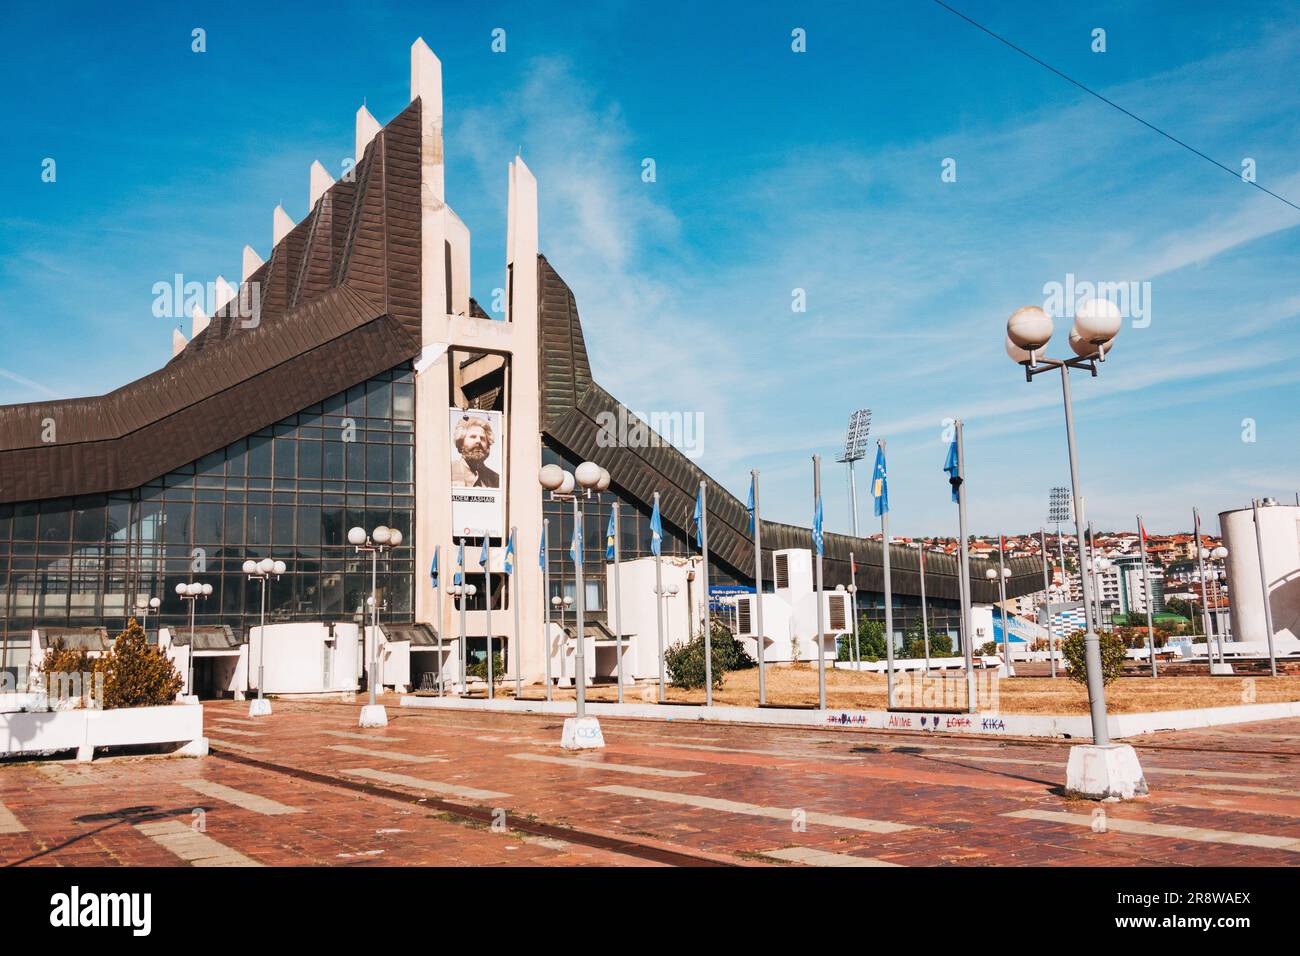 the Palace of Youth and Sports 'Boro and Ramiz', built 1977 in Pristina, Kosovo. Inspired by the Metabolist style of architecture Stock Photo